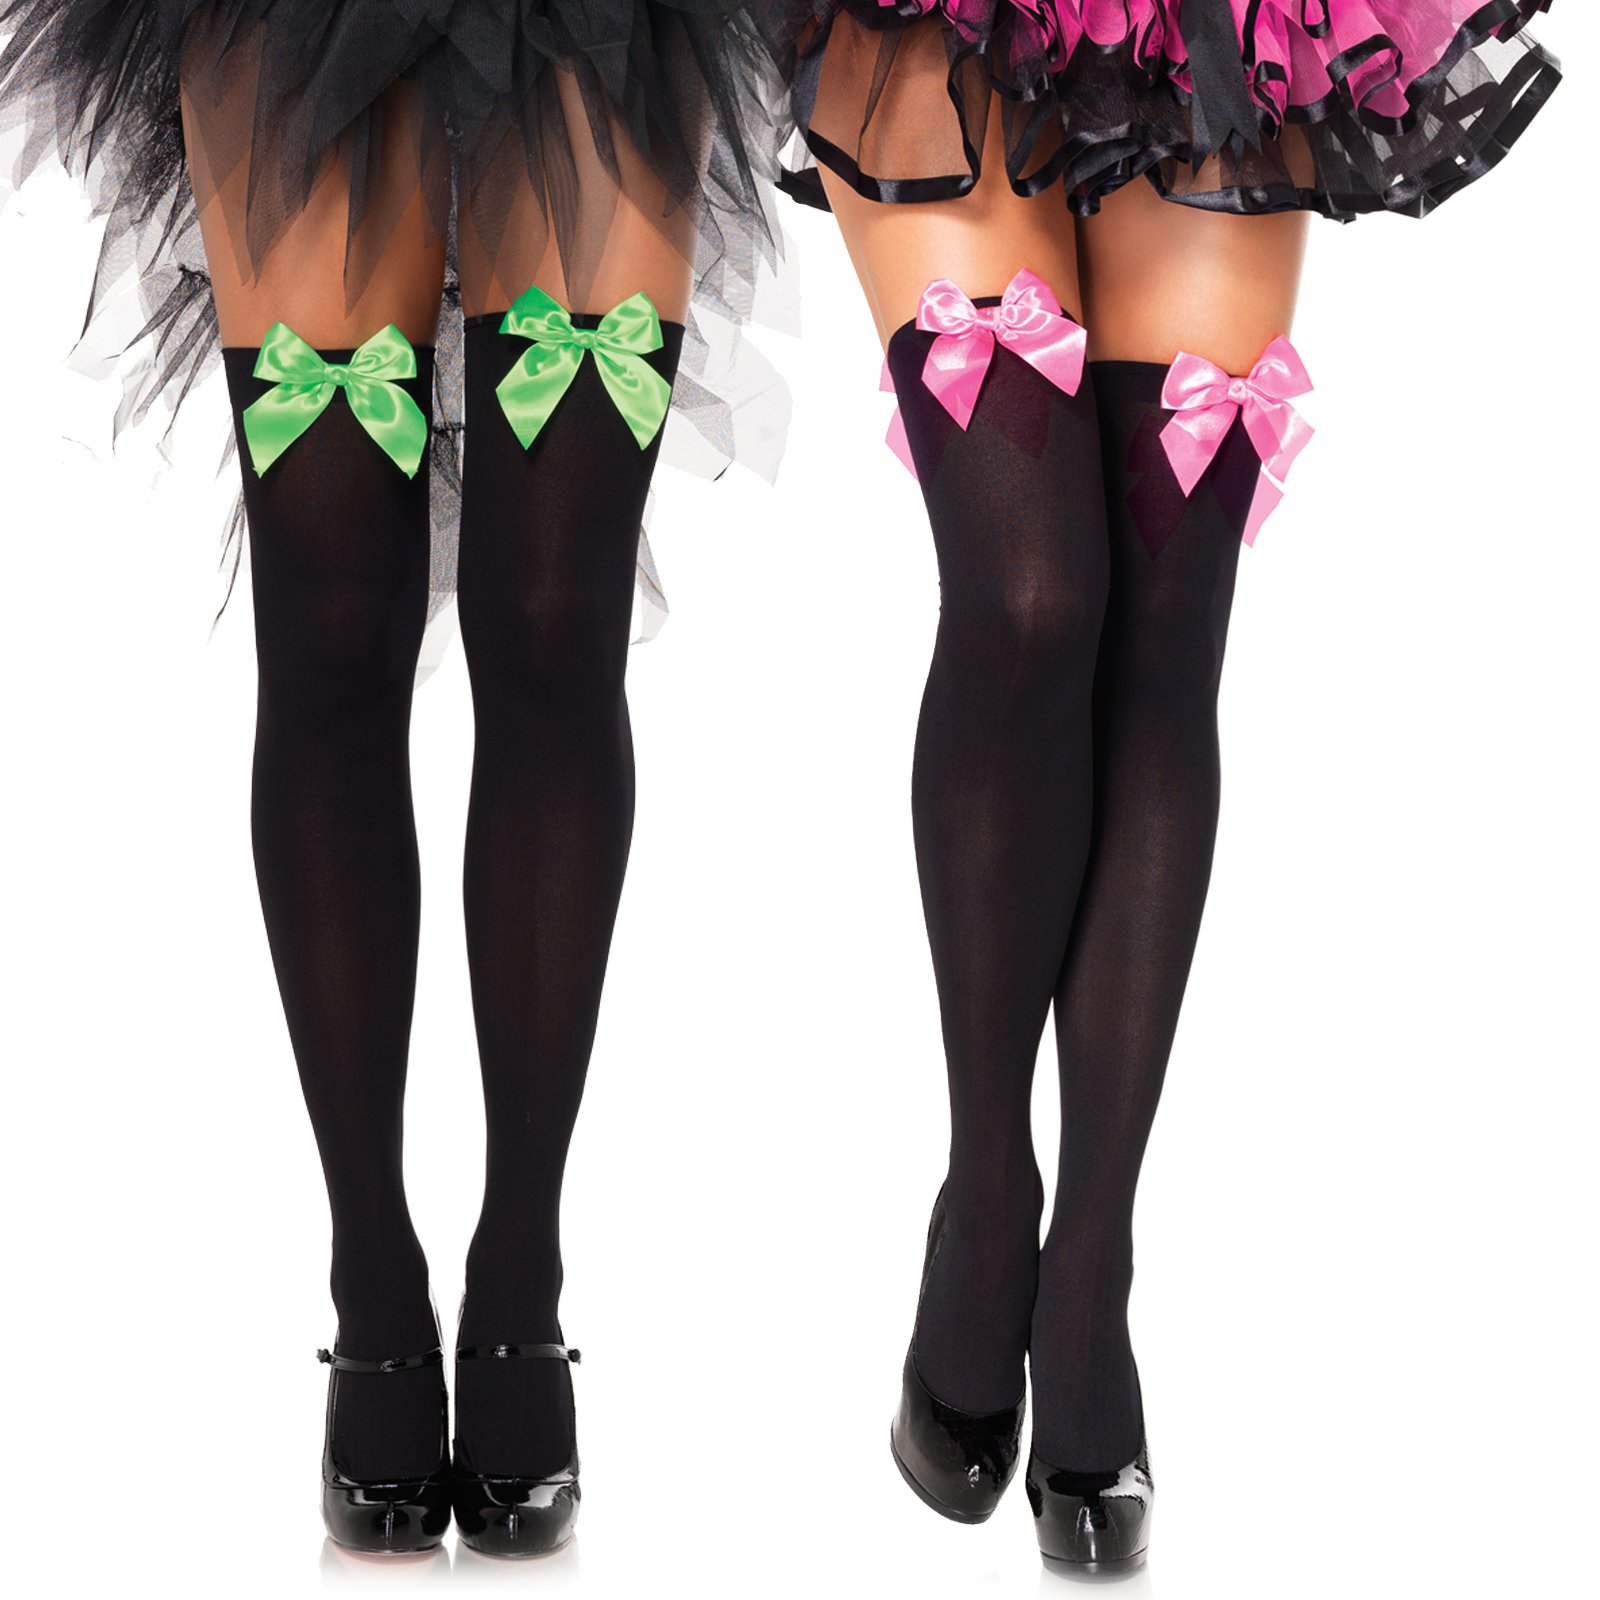 Black Adult Thigh Highs With Bow